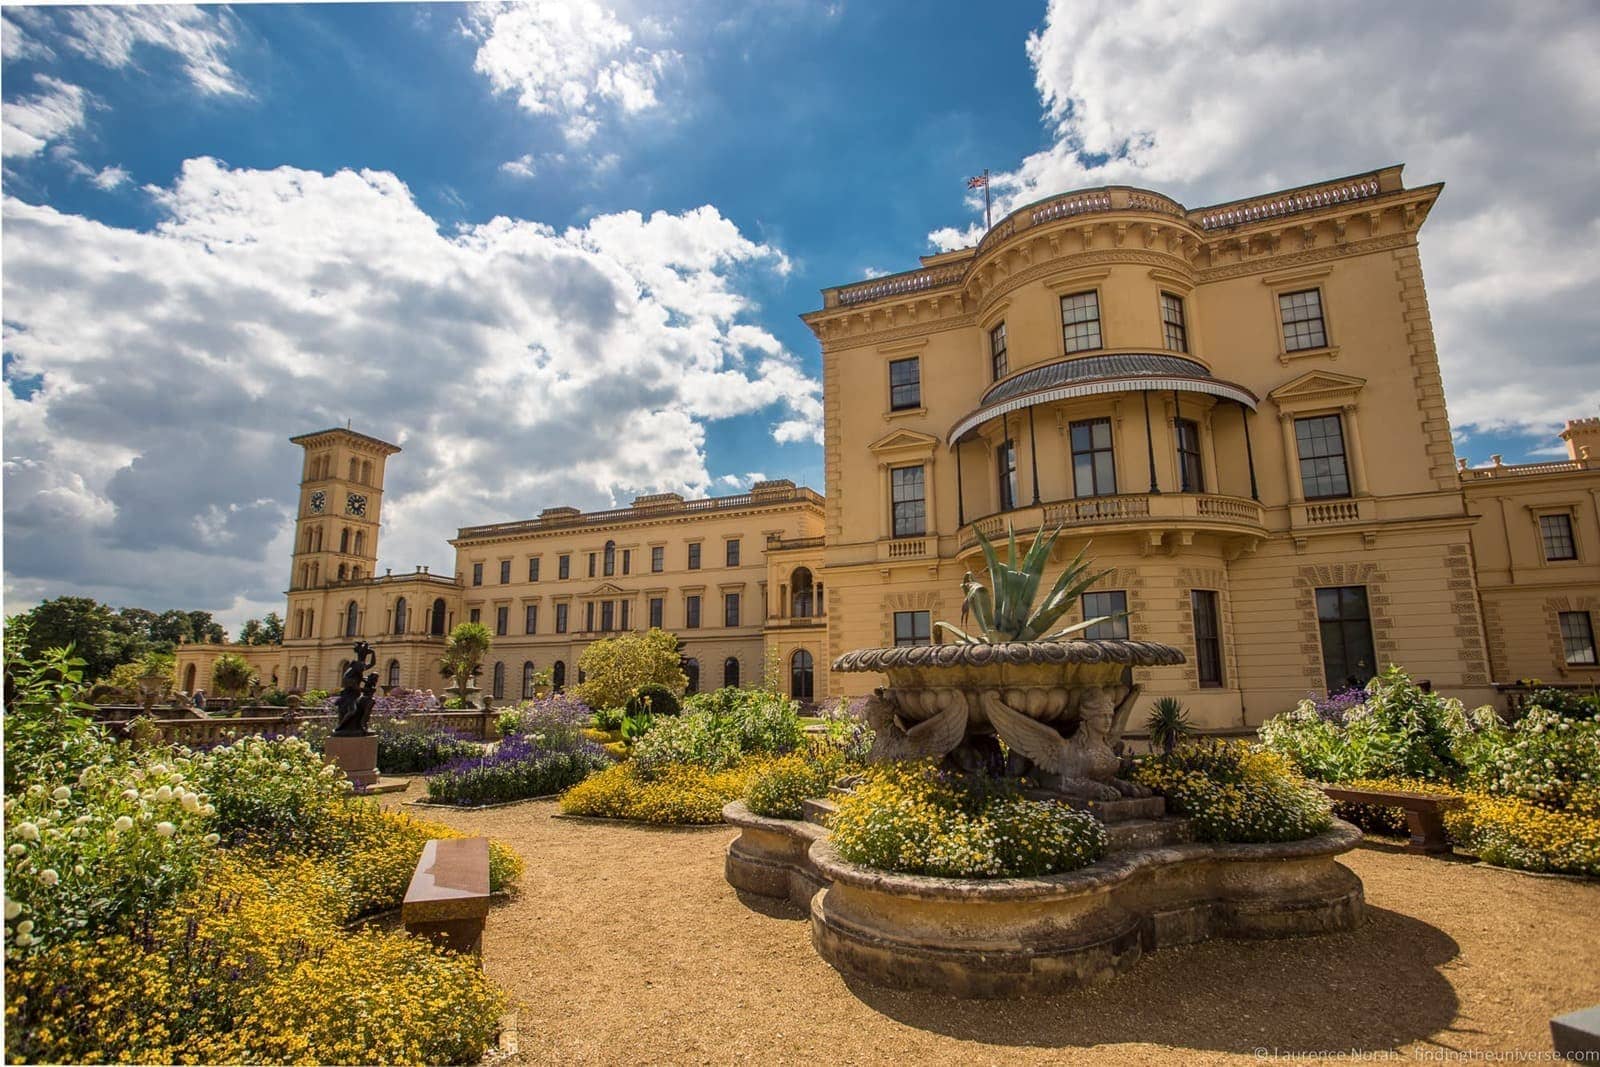 Isle of Wight attractions Osborne House